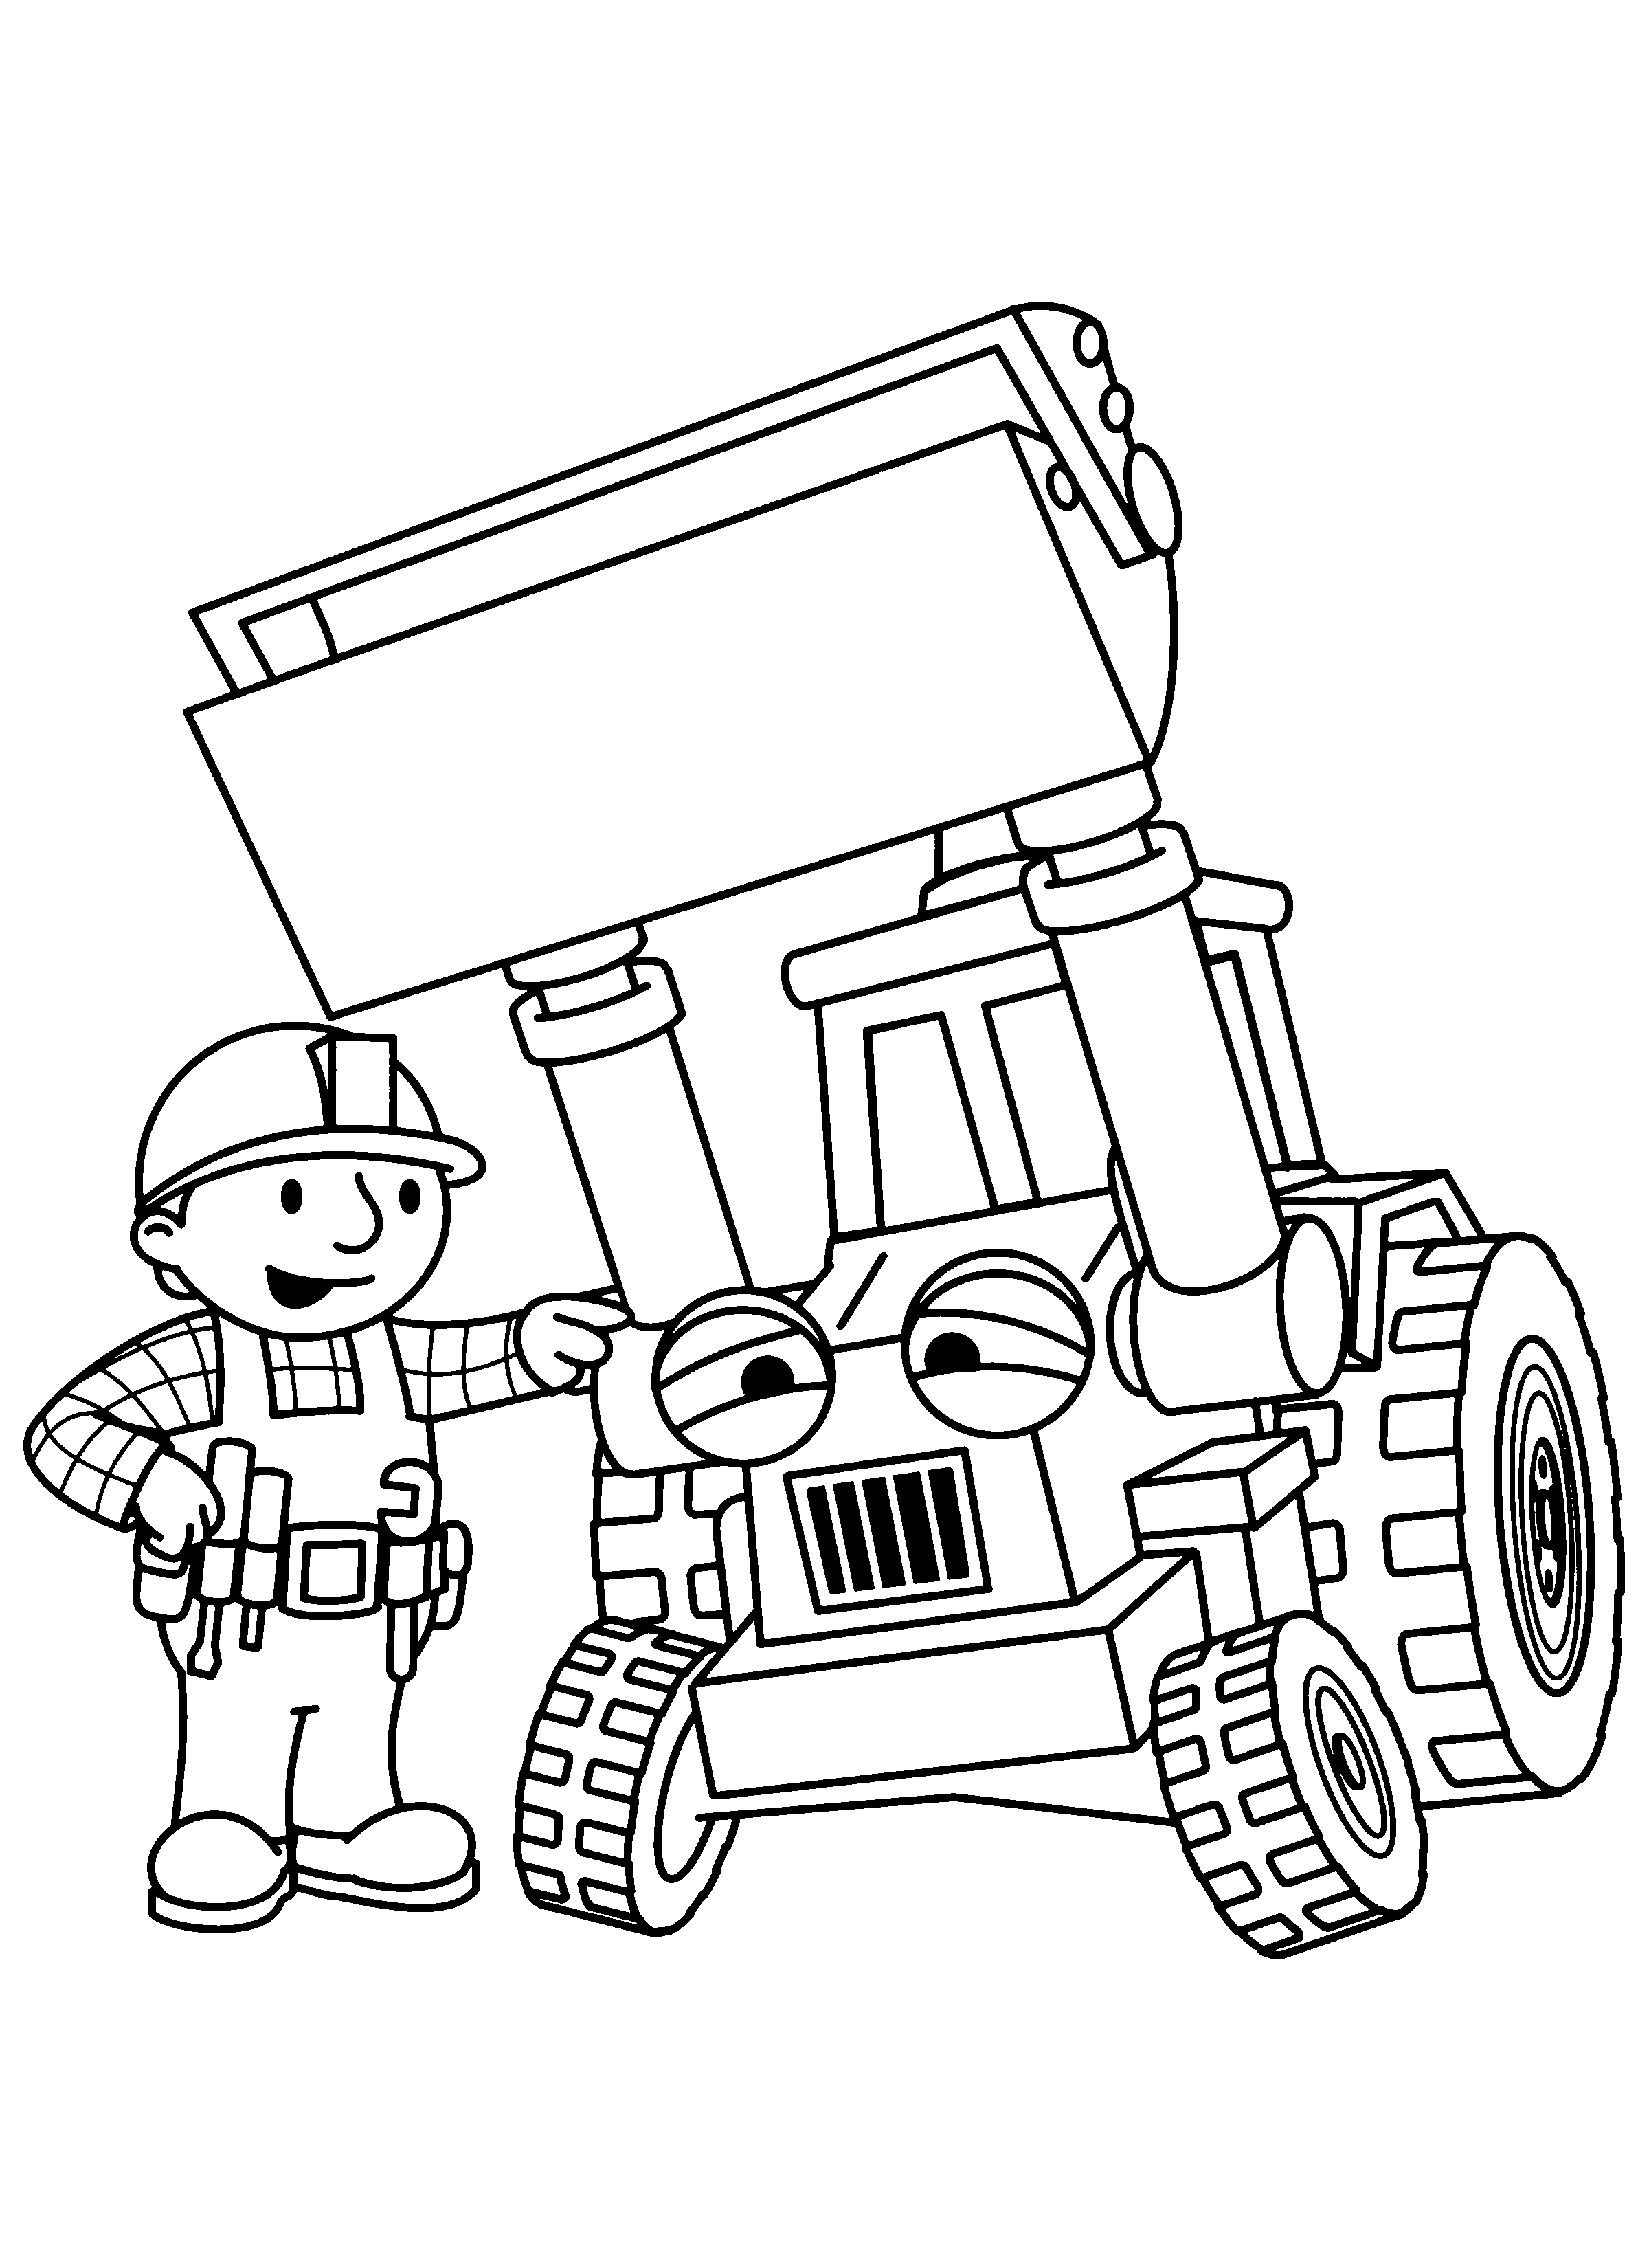 animated-coloring-pages-bob-the-builder-image-0048